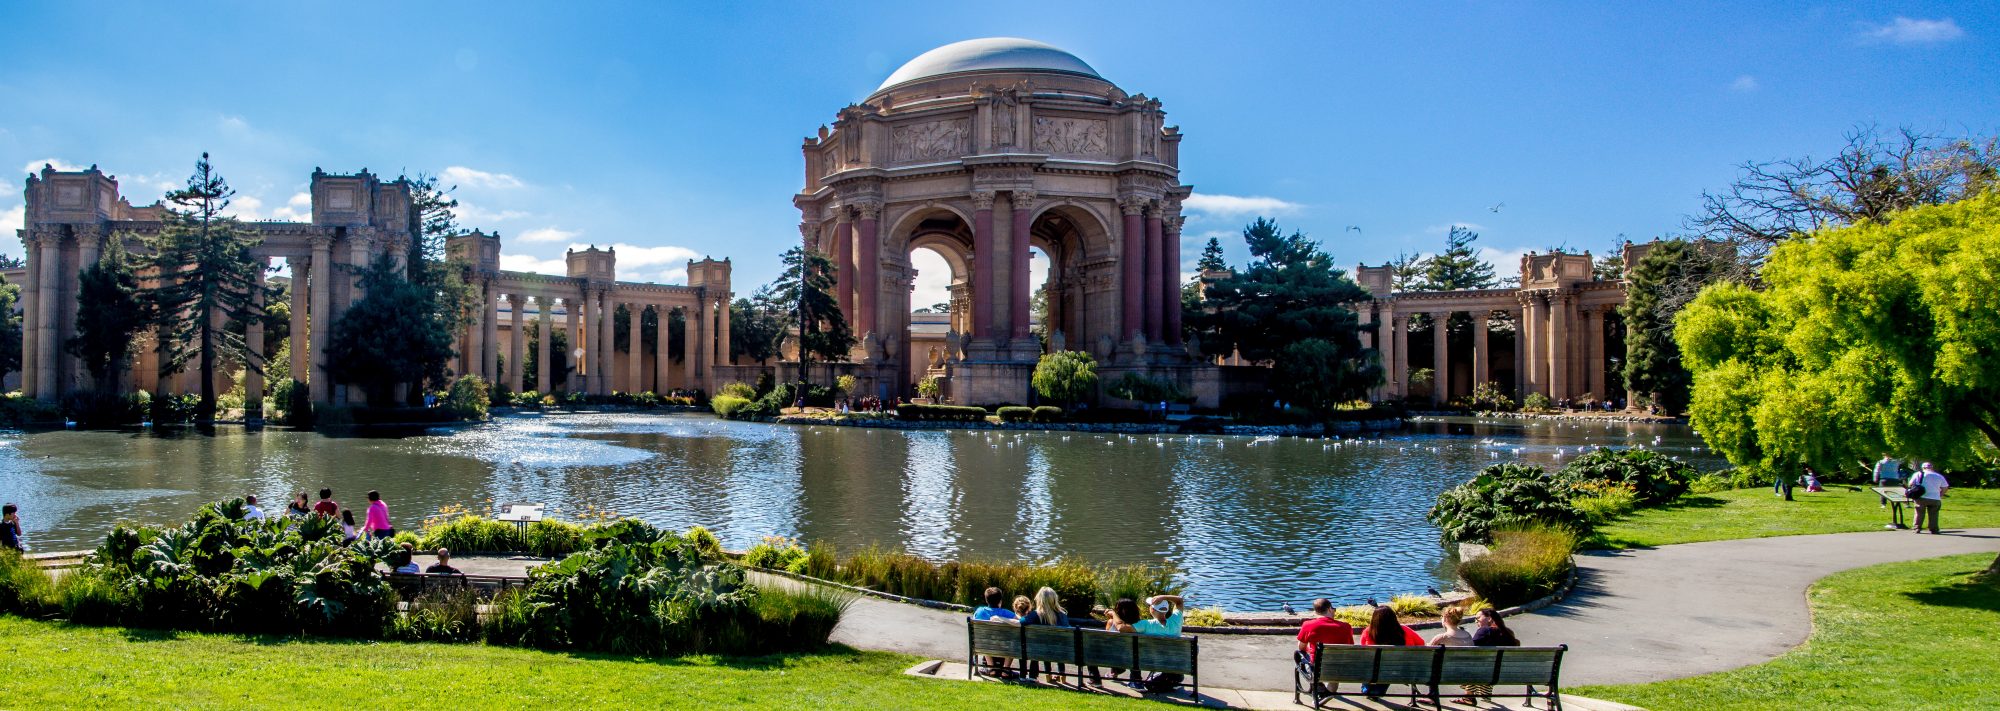 The San Francisco Palace of Fine Arts. Turn to the Oakland sexual harassment lawyer at The Law Office of Jeannette Vaccaro when you have a case.